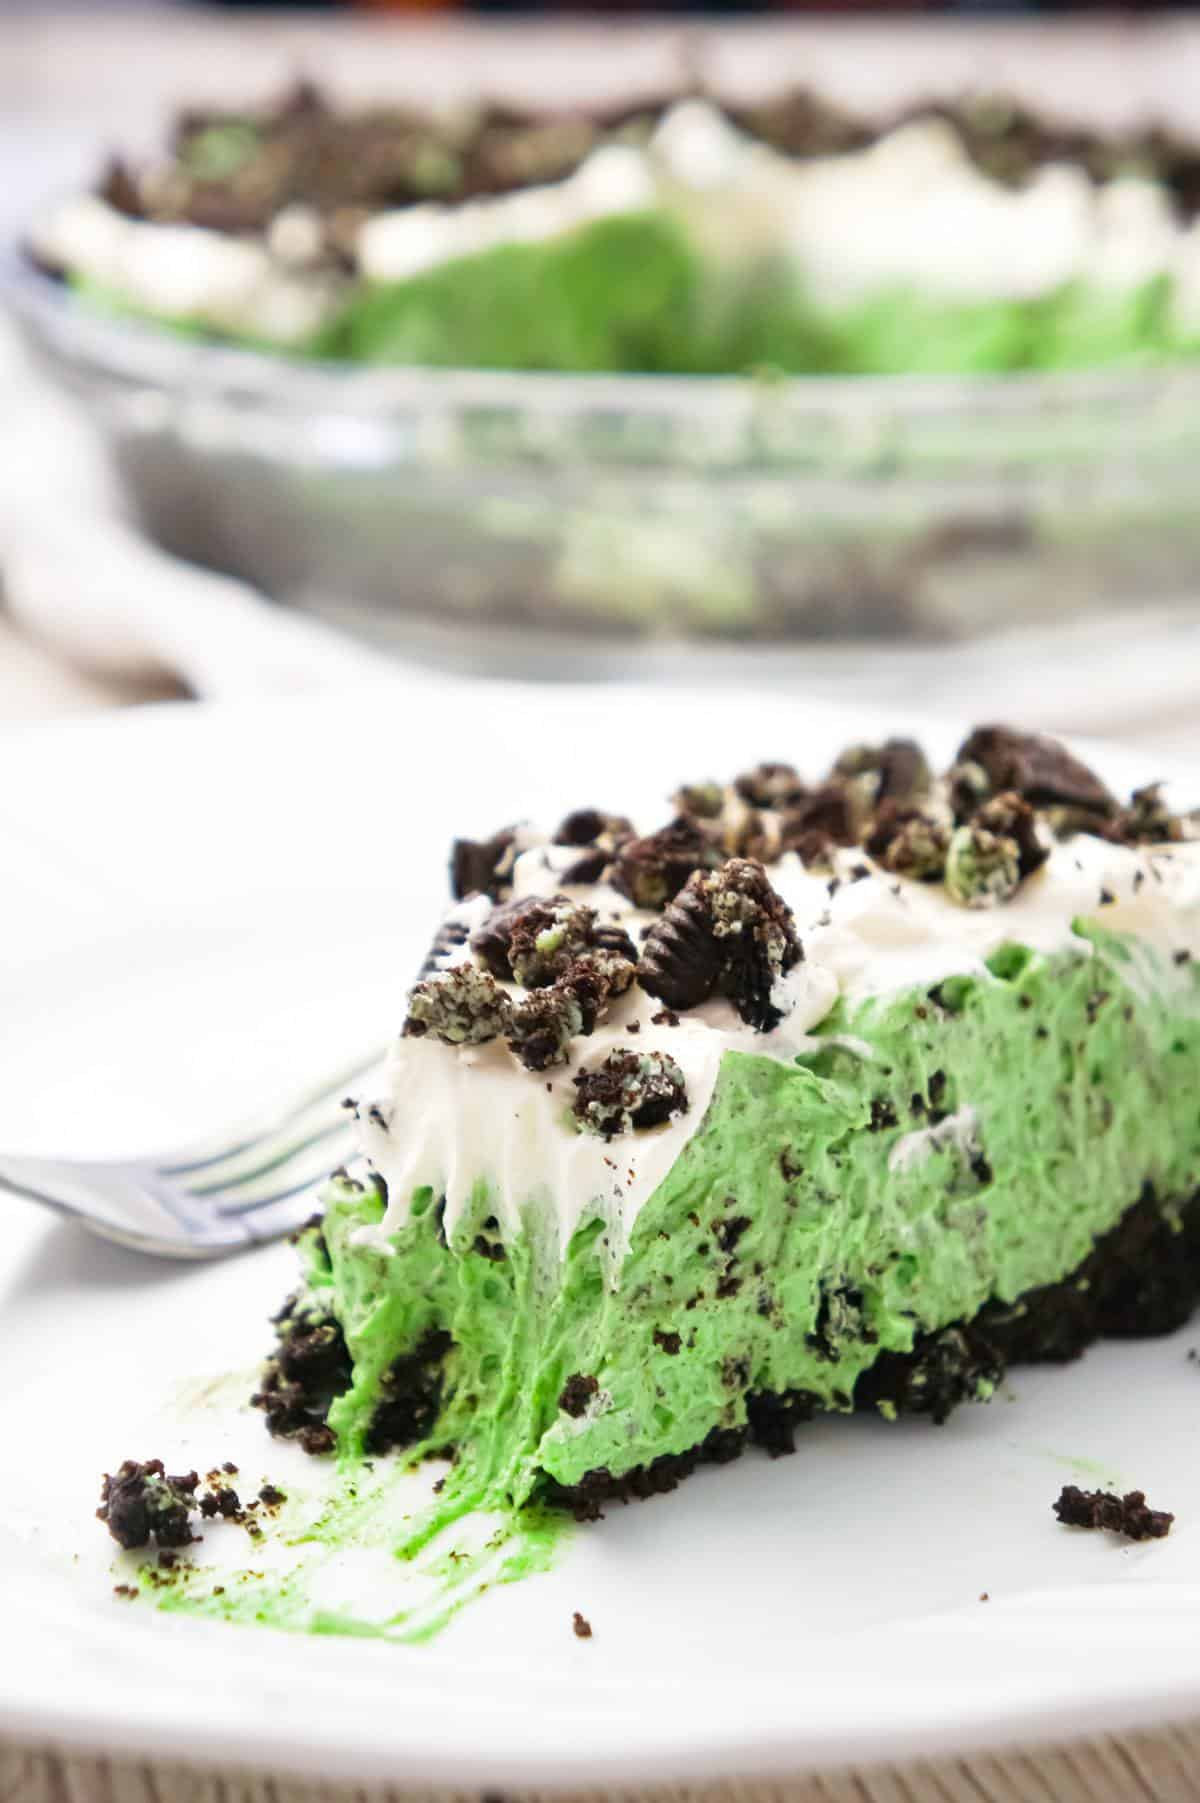 Mint Oreo Pie is an easy no bake dessert recipe with a creamy mint Oreo pudding filling, topped with Cool Whip, all in an Oreo crust.